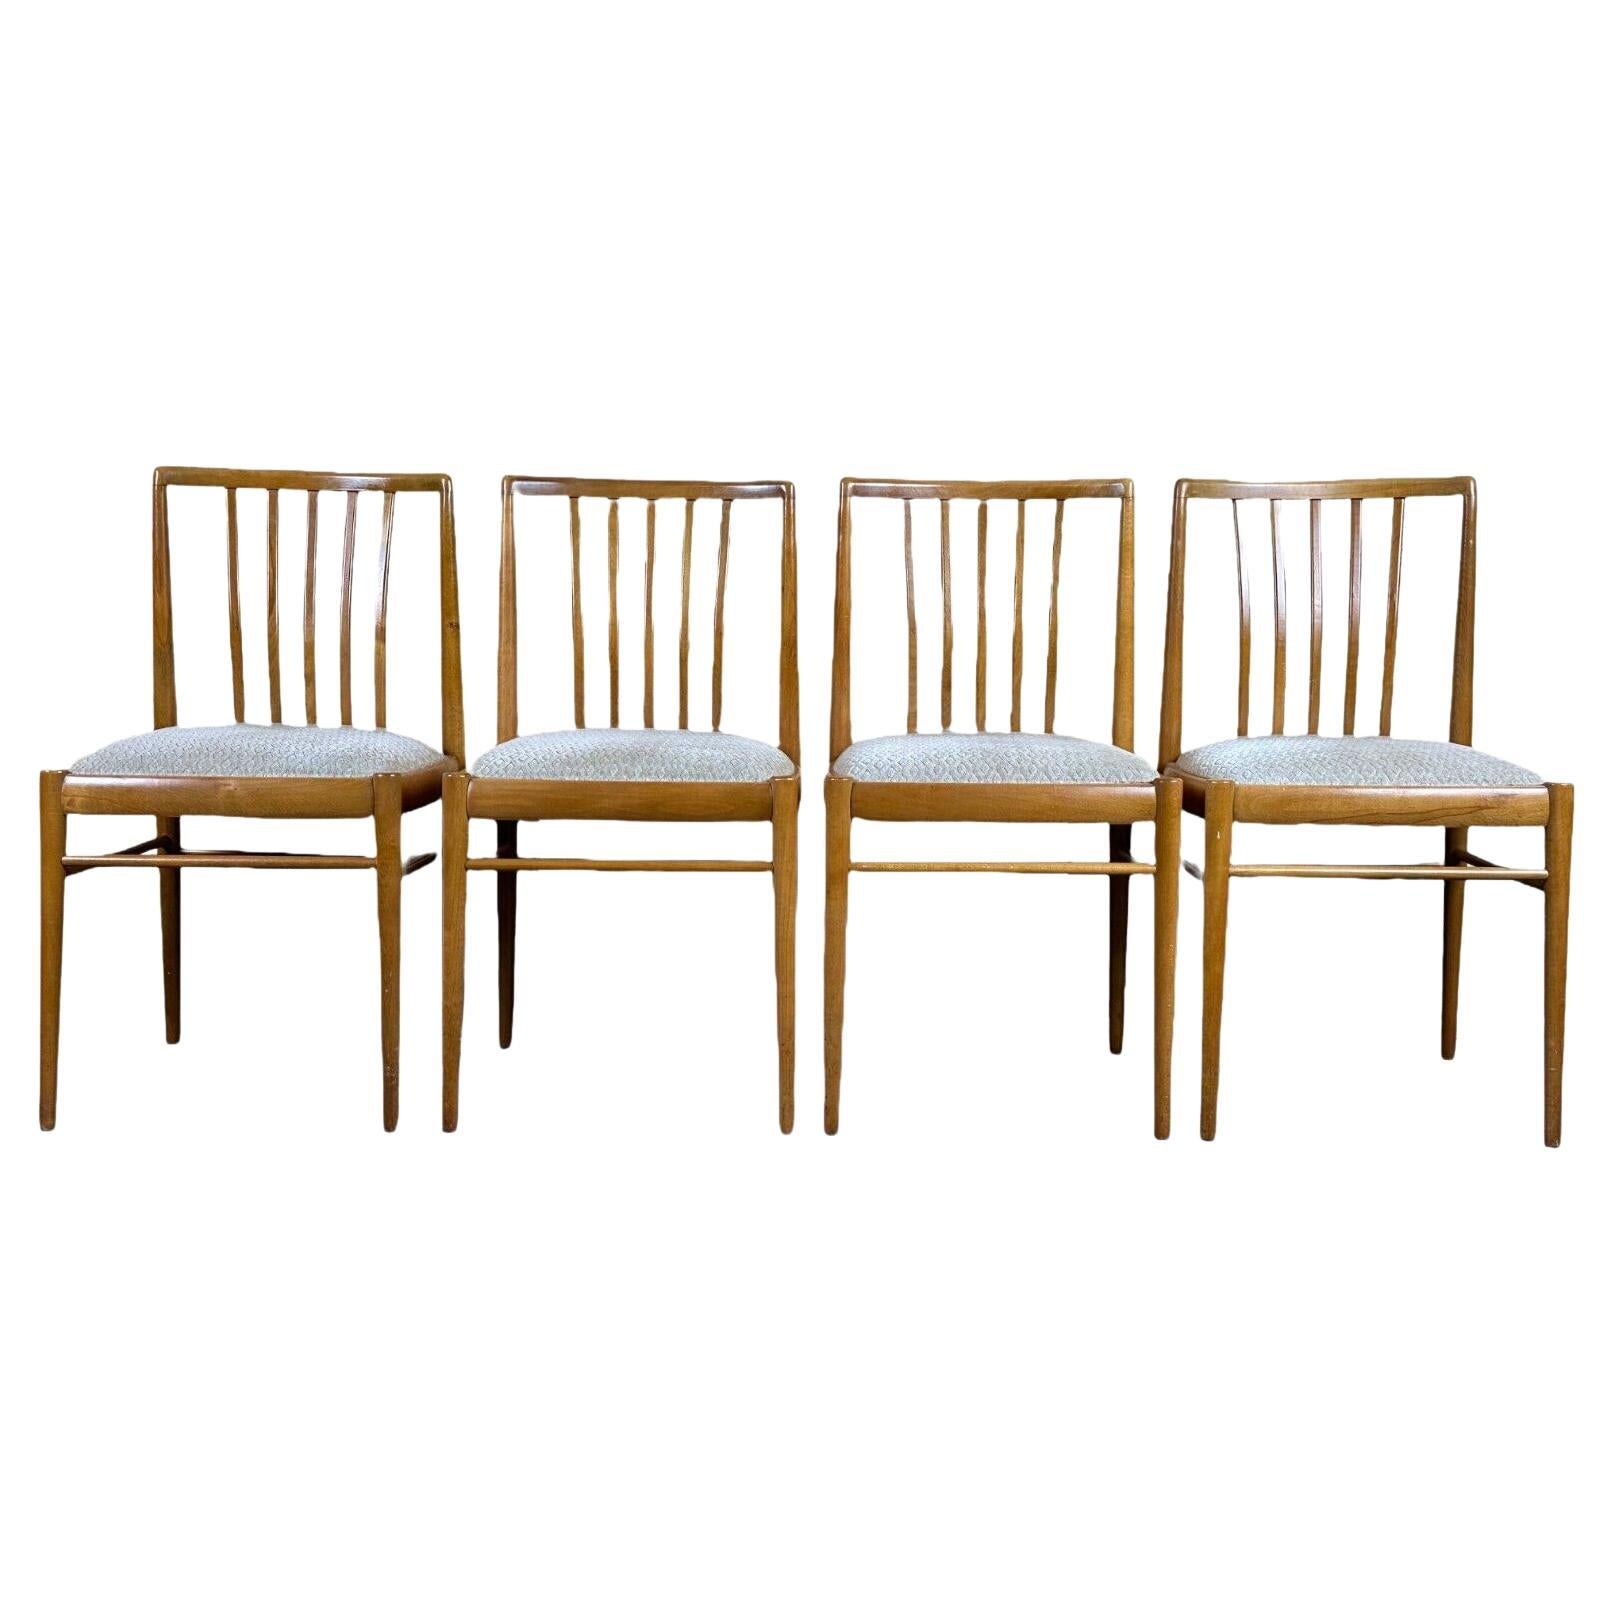 4x 60s 70s Dining Chair Mid Century Danish Modern Design For Sale